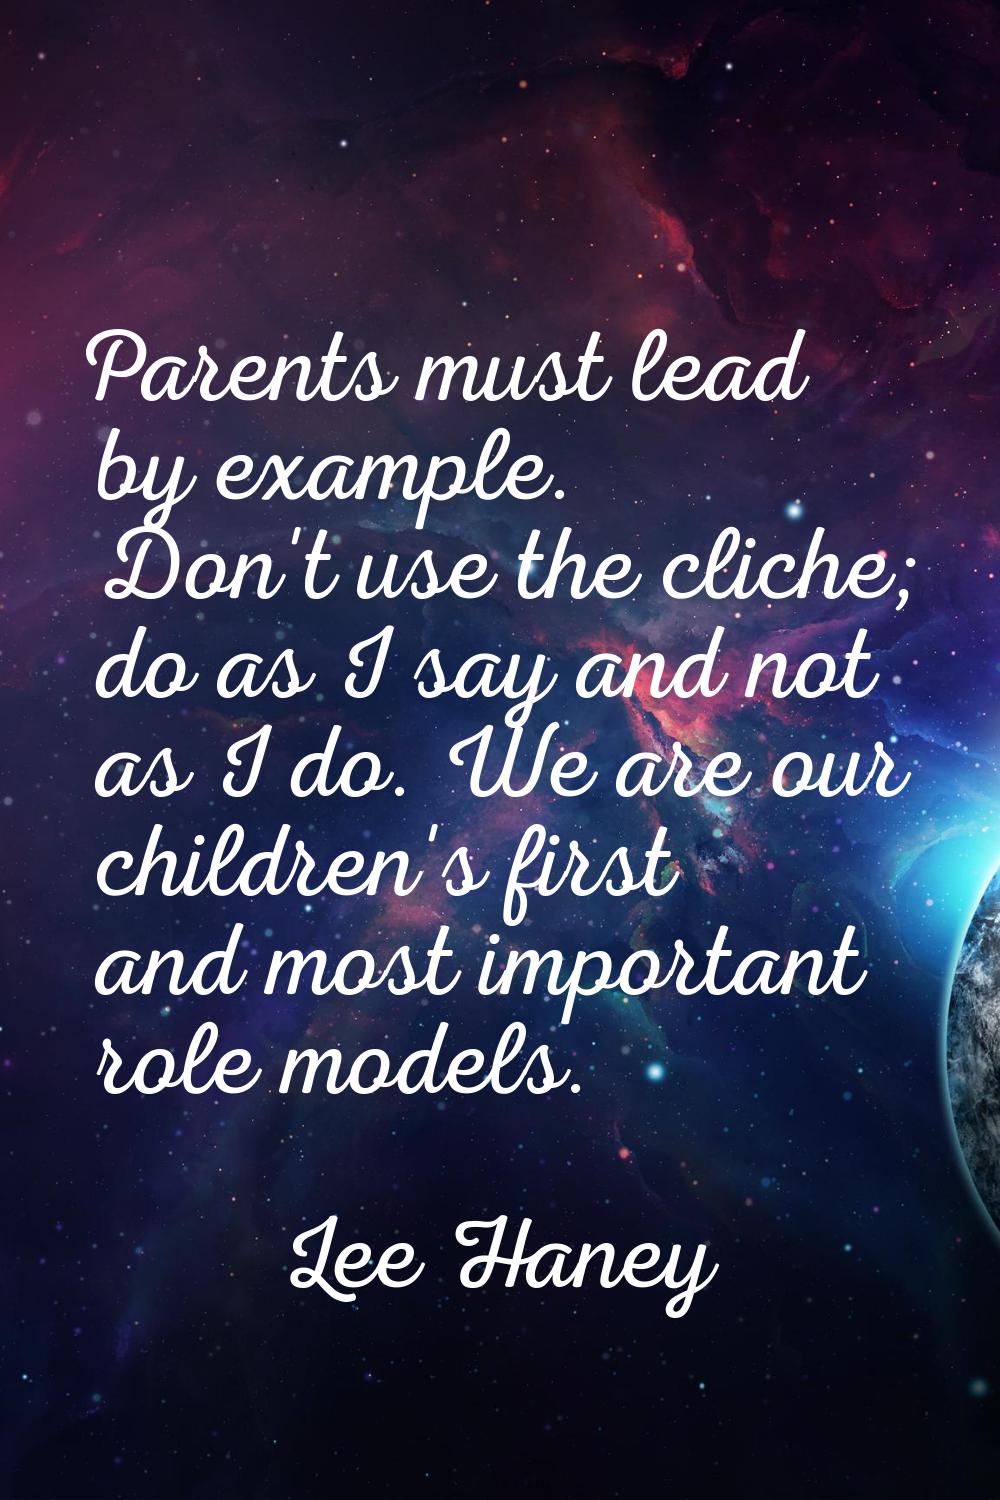 Parents must lead by example. Don't use the cliche; do as I say and not as I do. We are our childre